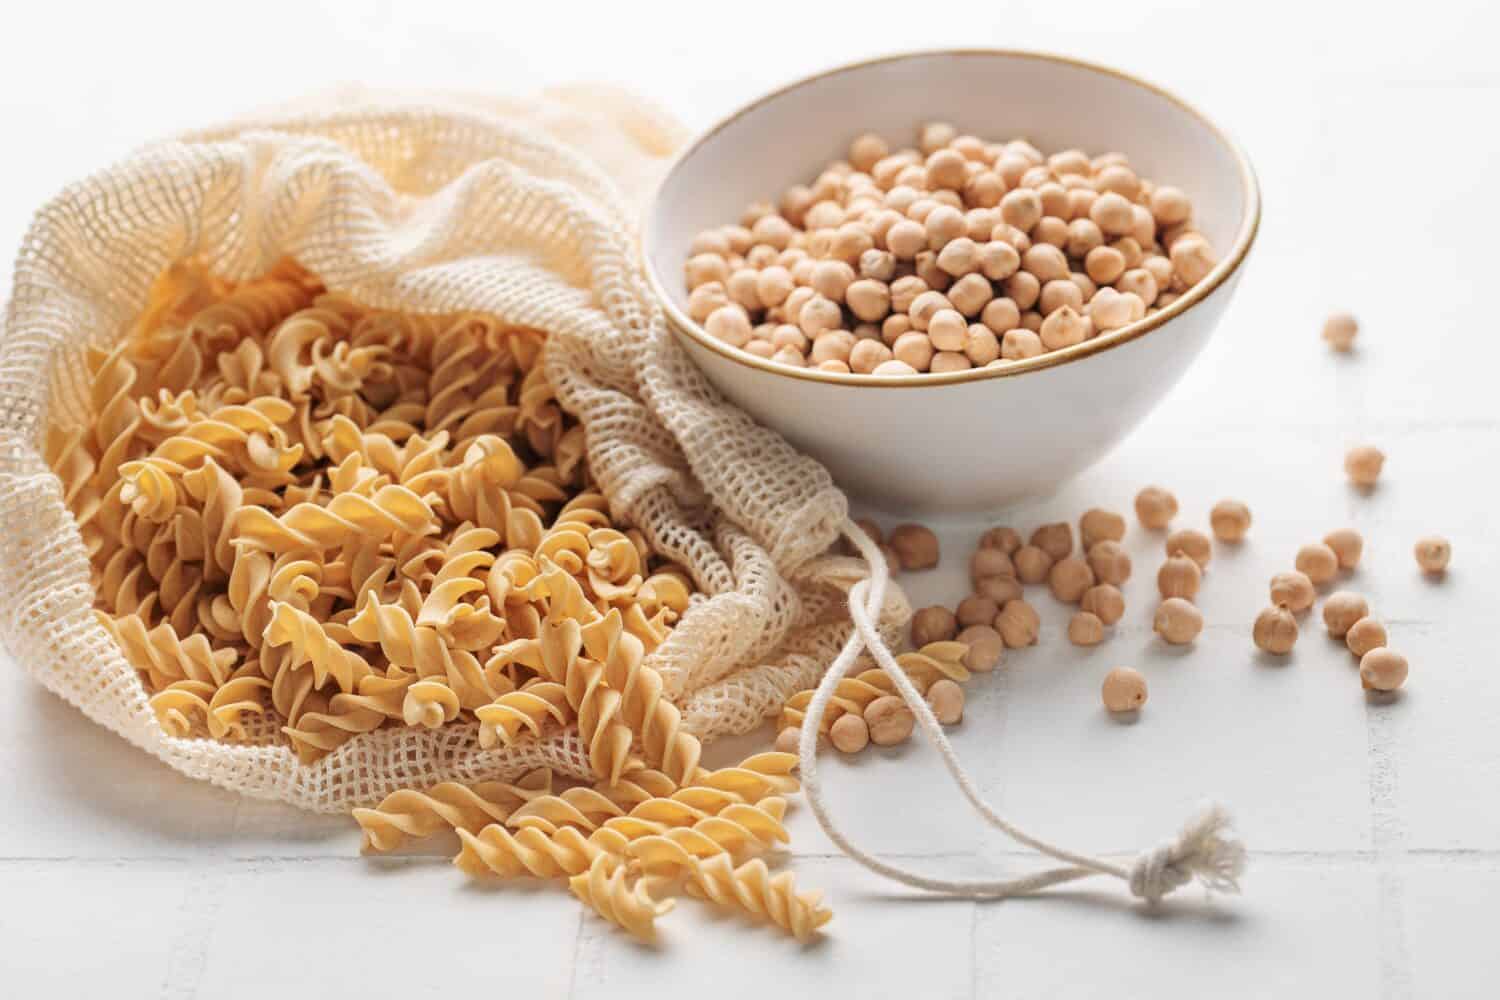 Chickpea ben fusilli pasta on a white tile background. Bag with raw pasta and bowl with chickpea beans. Gluten free pasta.